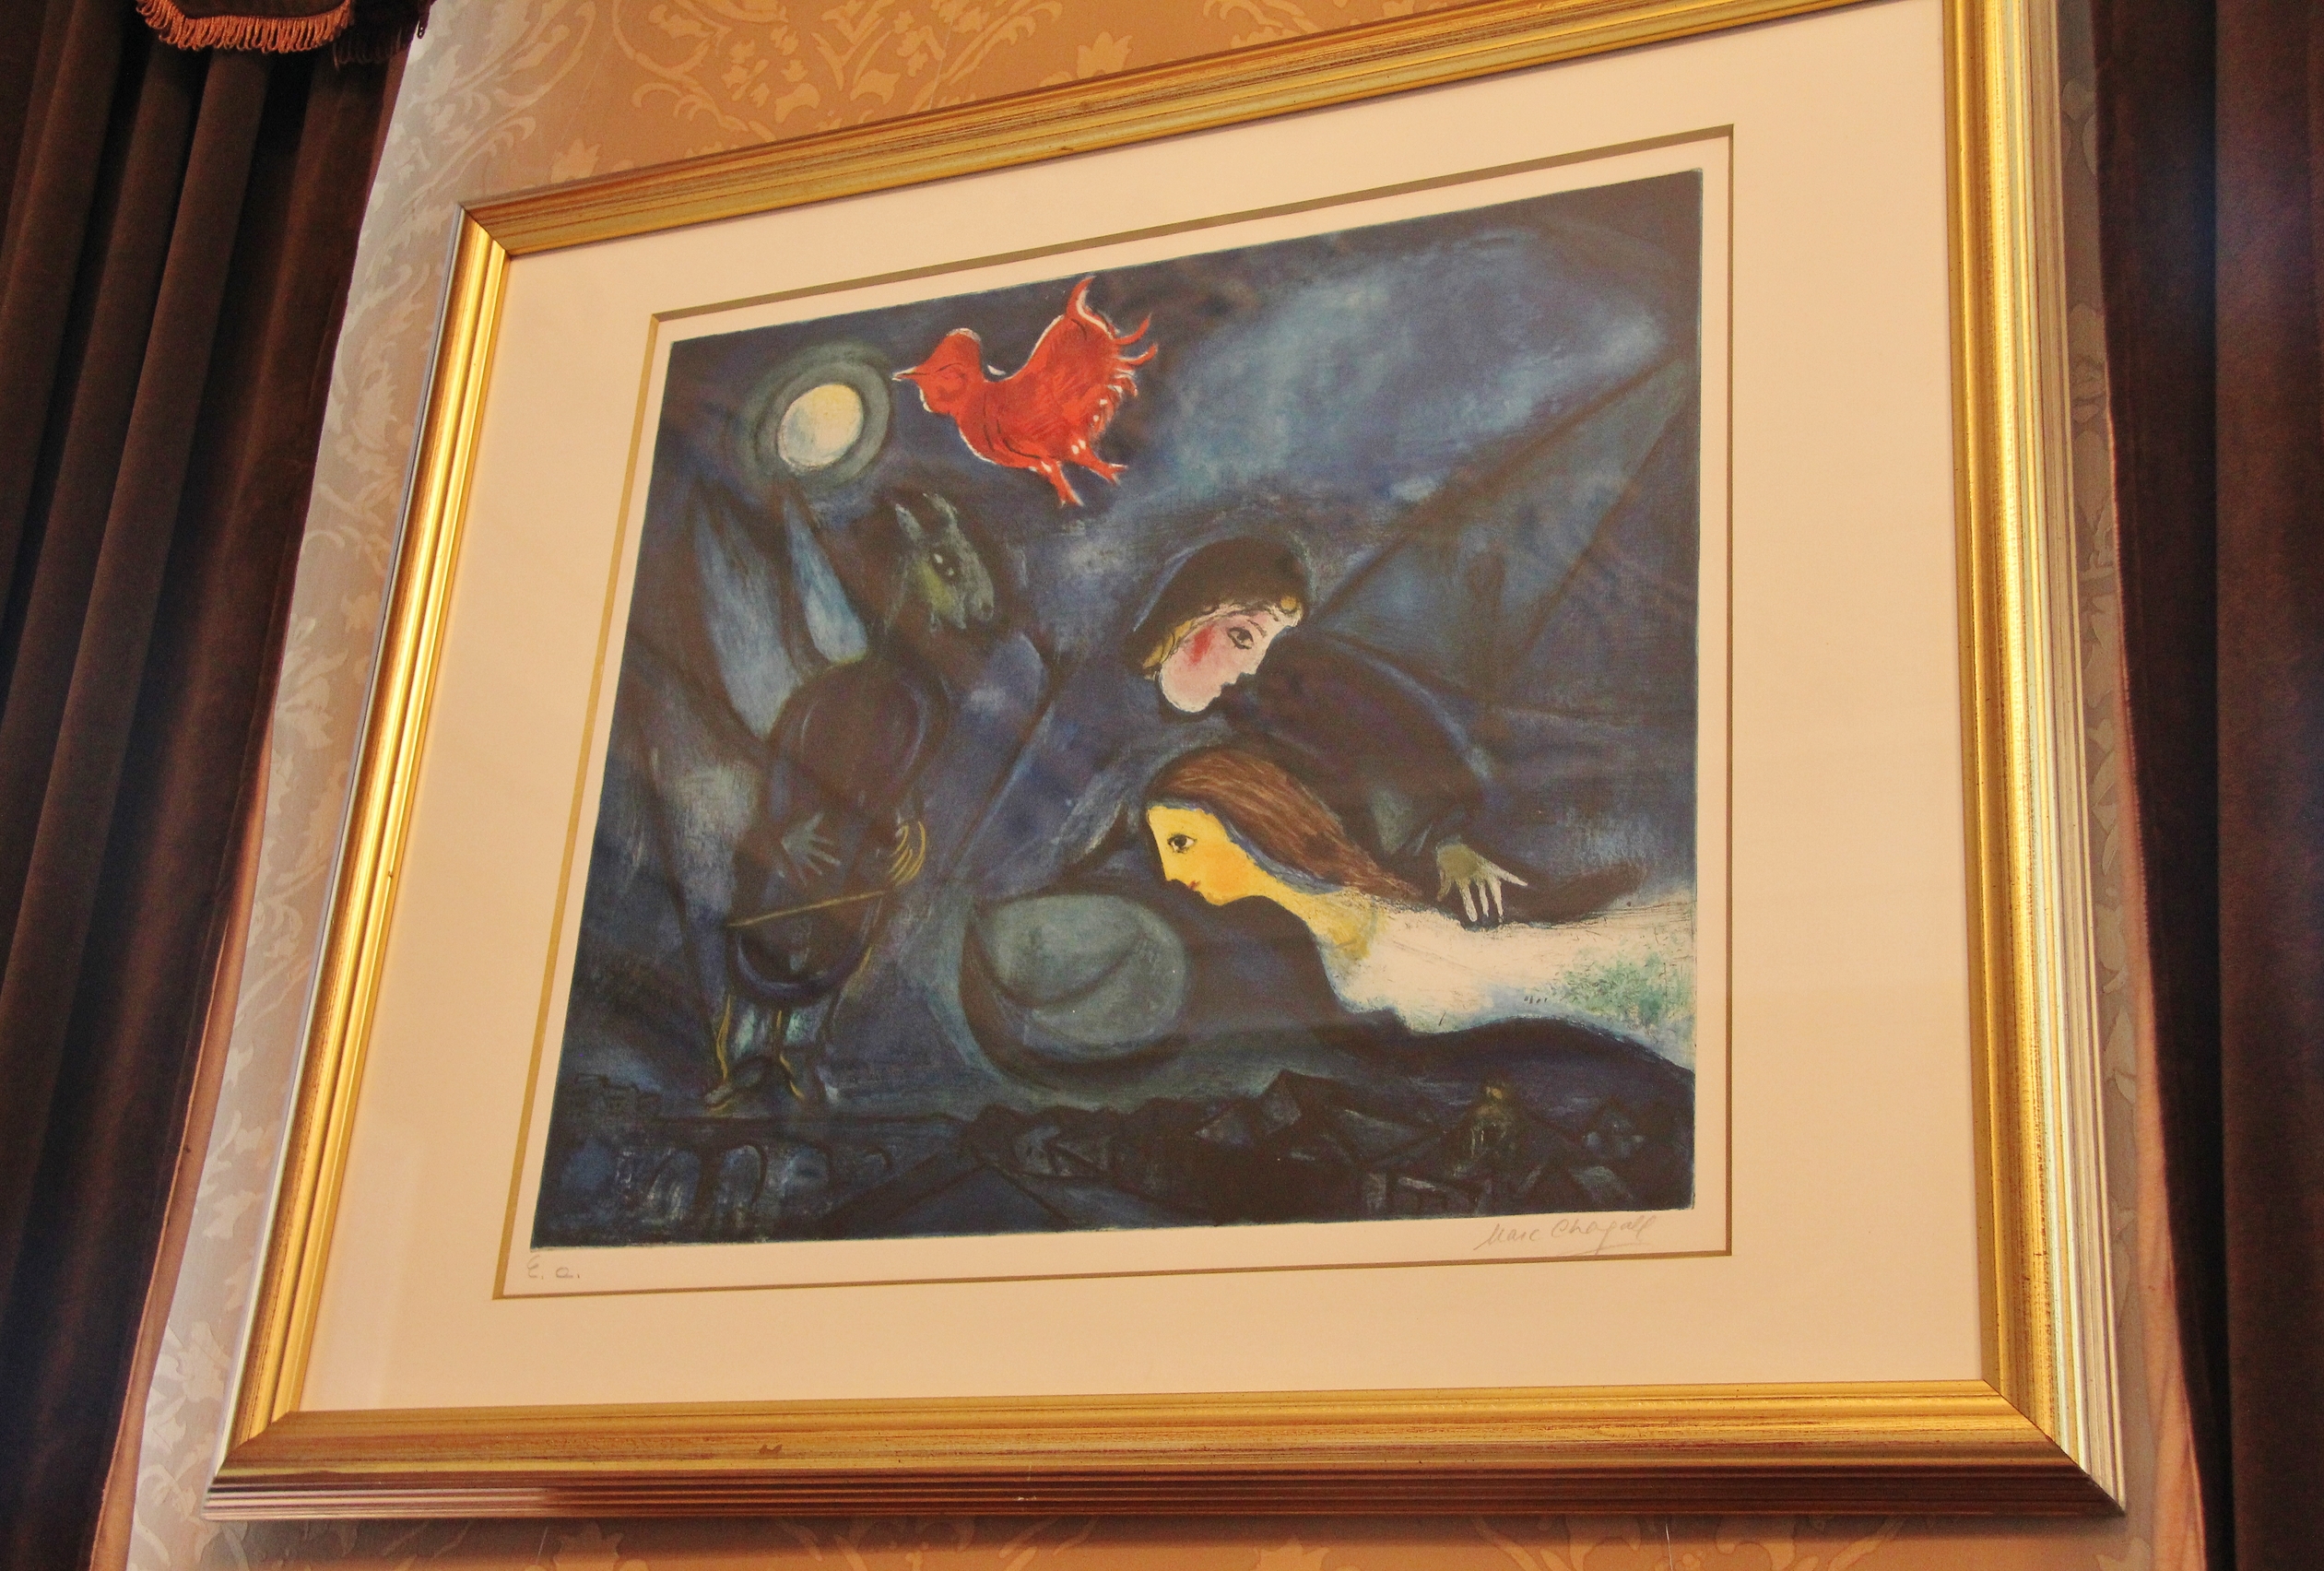 Chagall painting inside the History of Lodz Museum